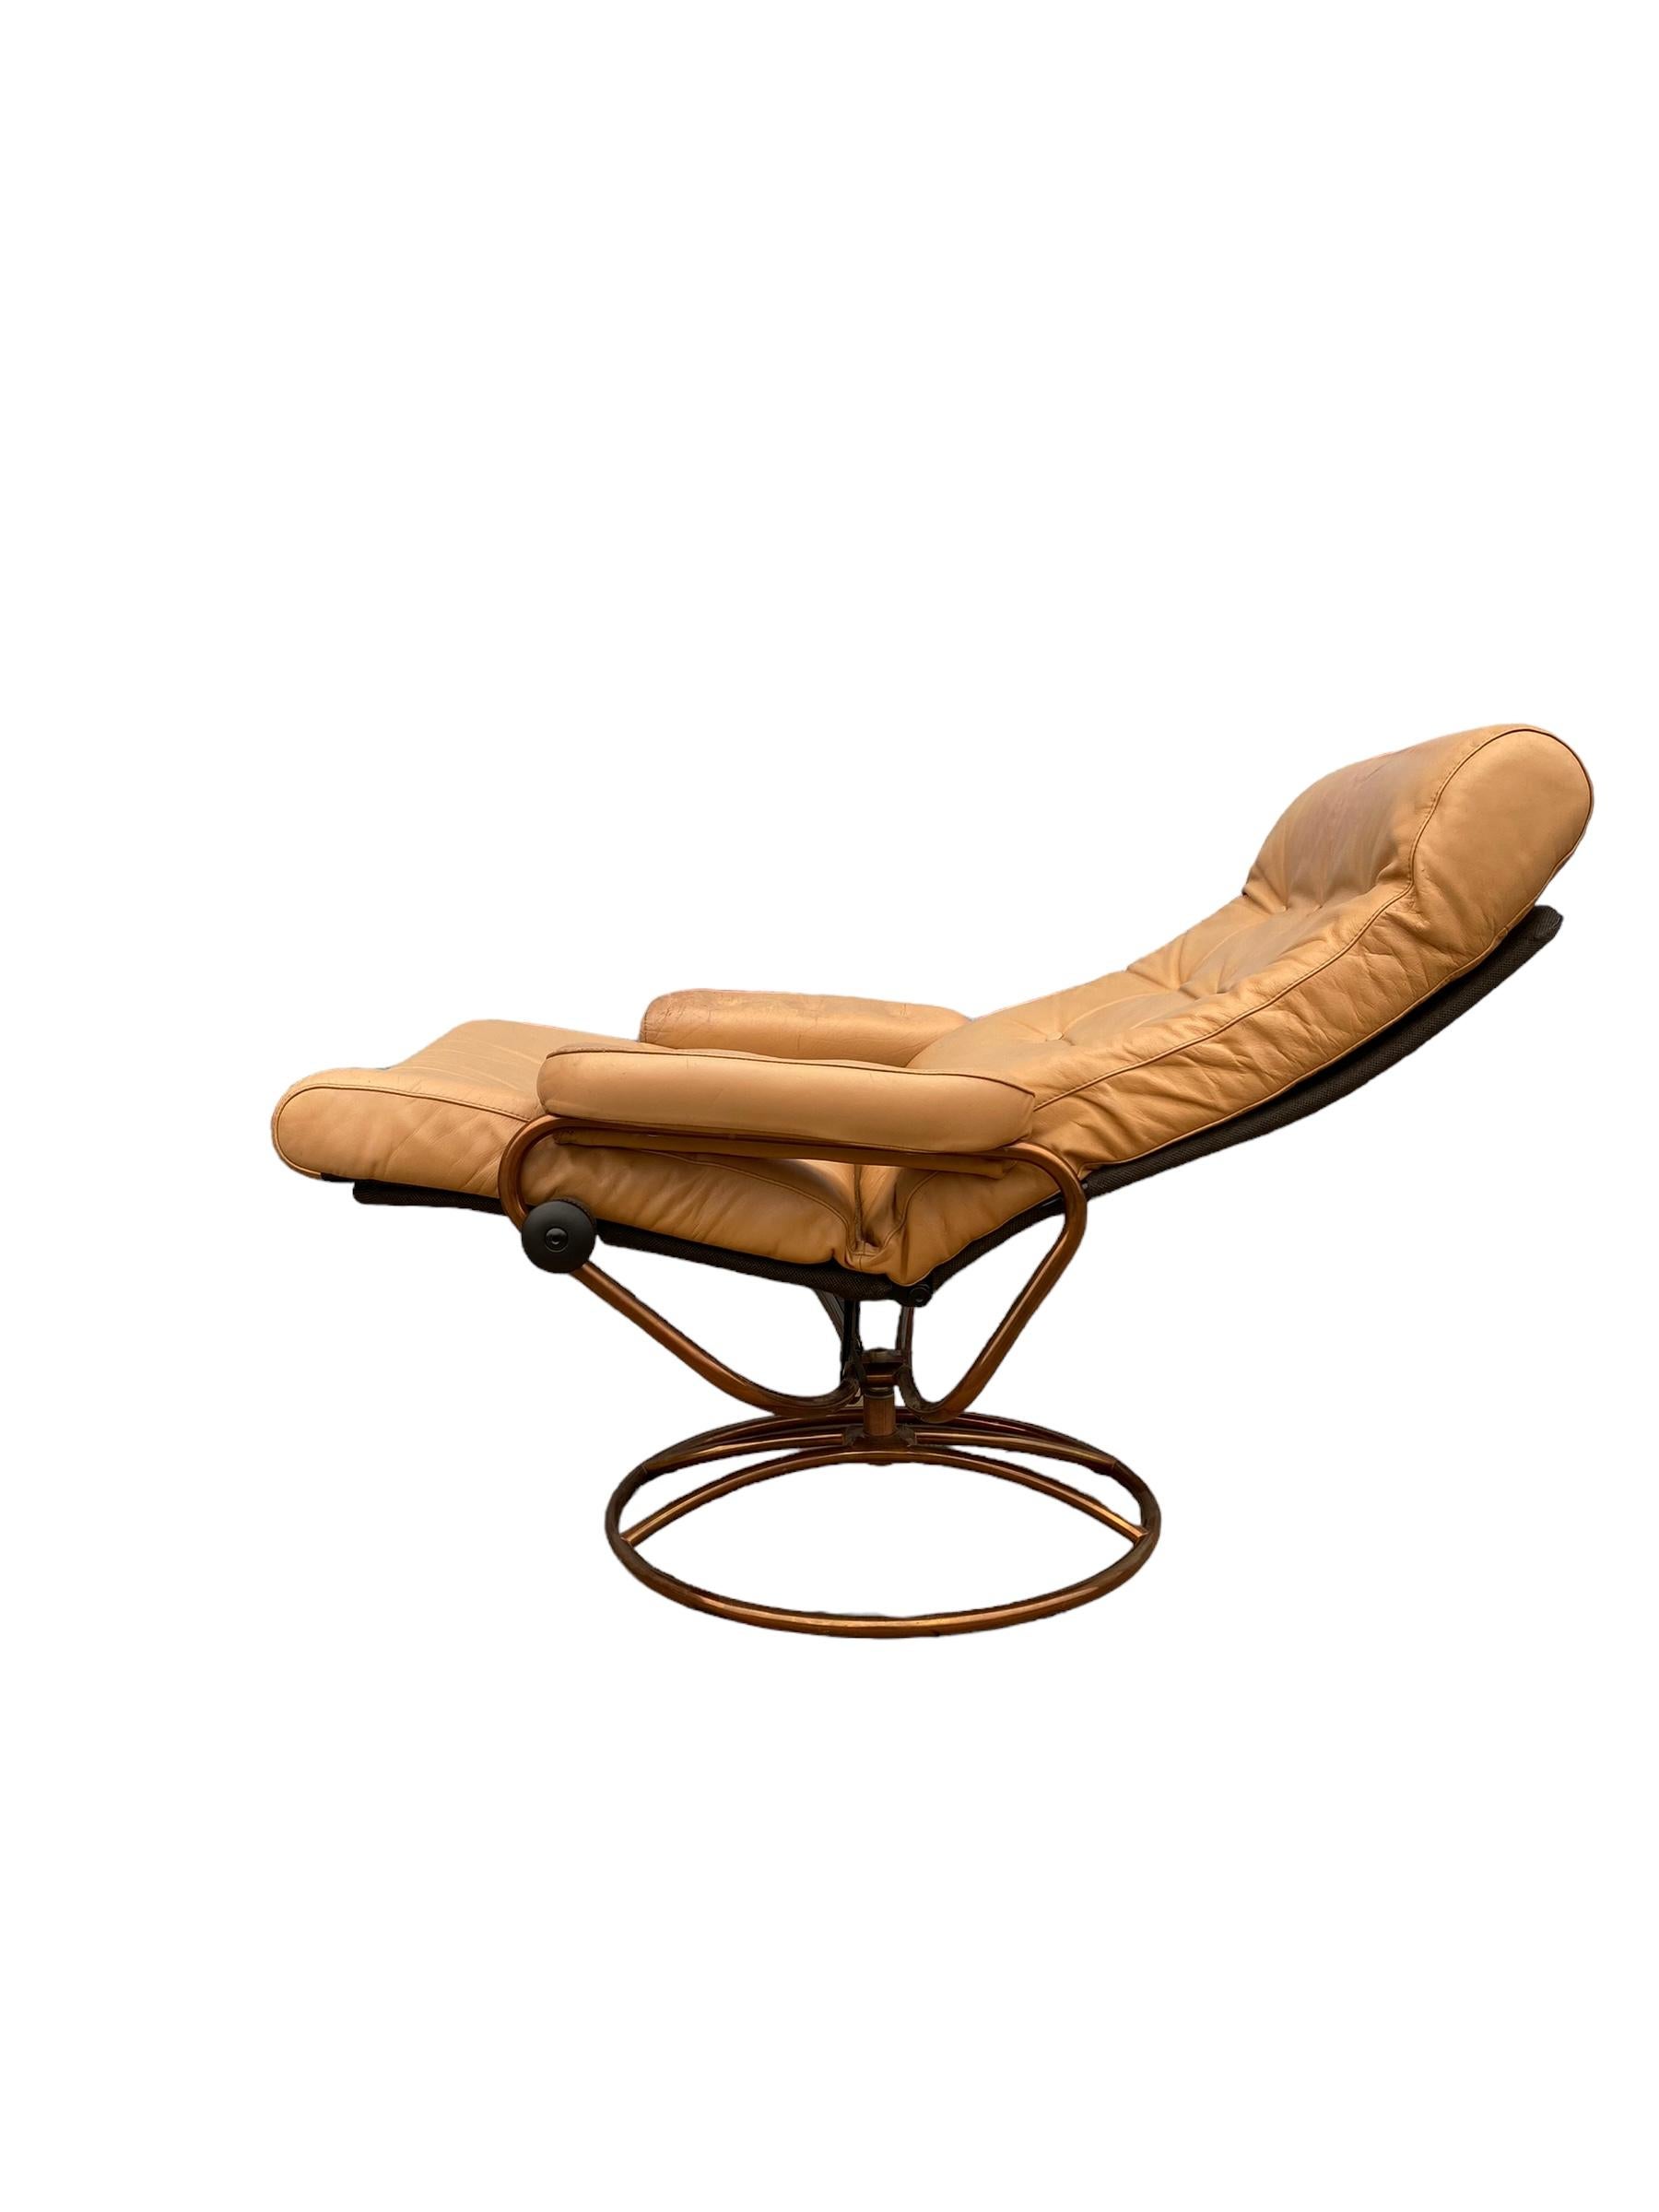 Ekornes Stressless reclining lounge chair and ottoman. Elegant mid century Scandinavian design with tubular bent steel frame in copper finish and cream beige leather cushion. Lounge in comfort with this timeless design.